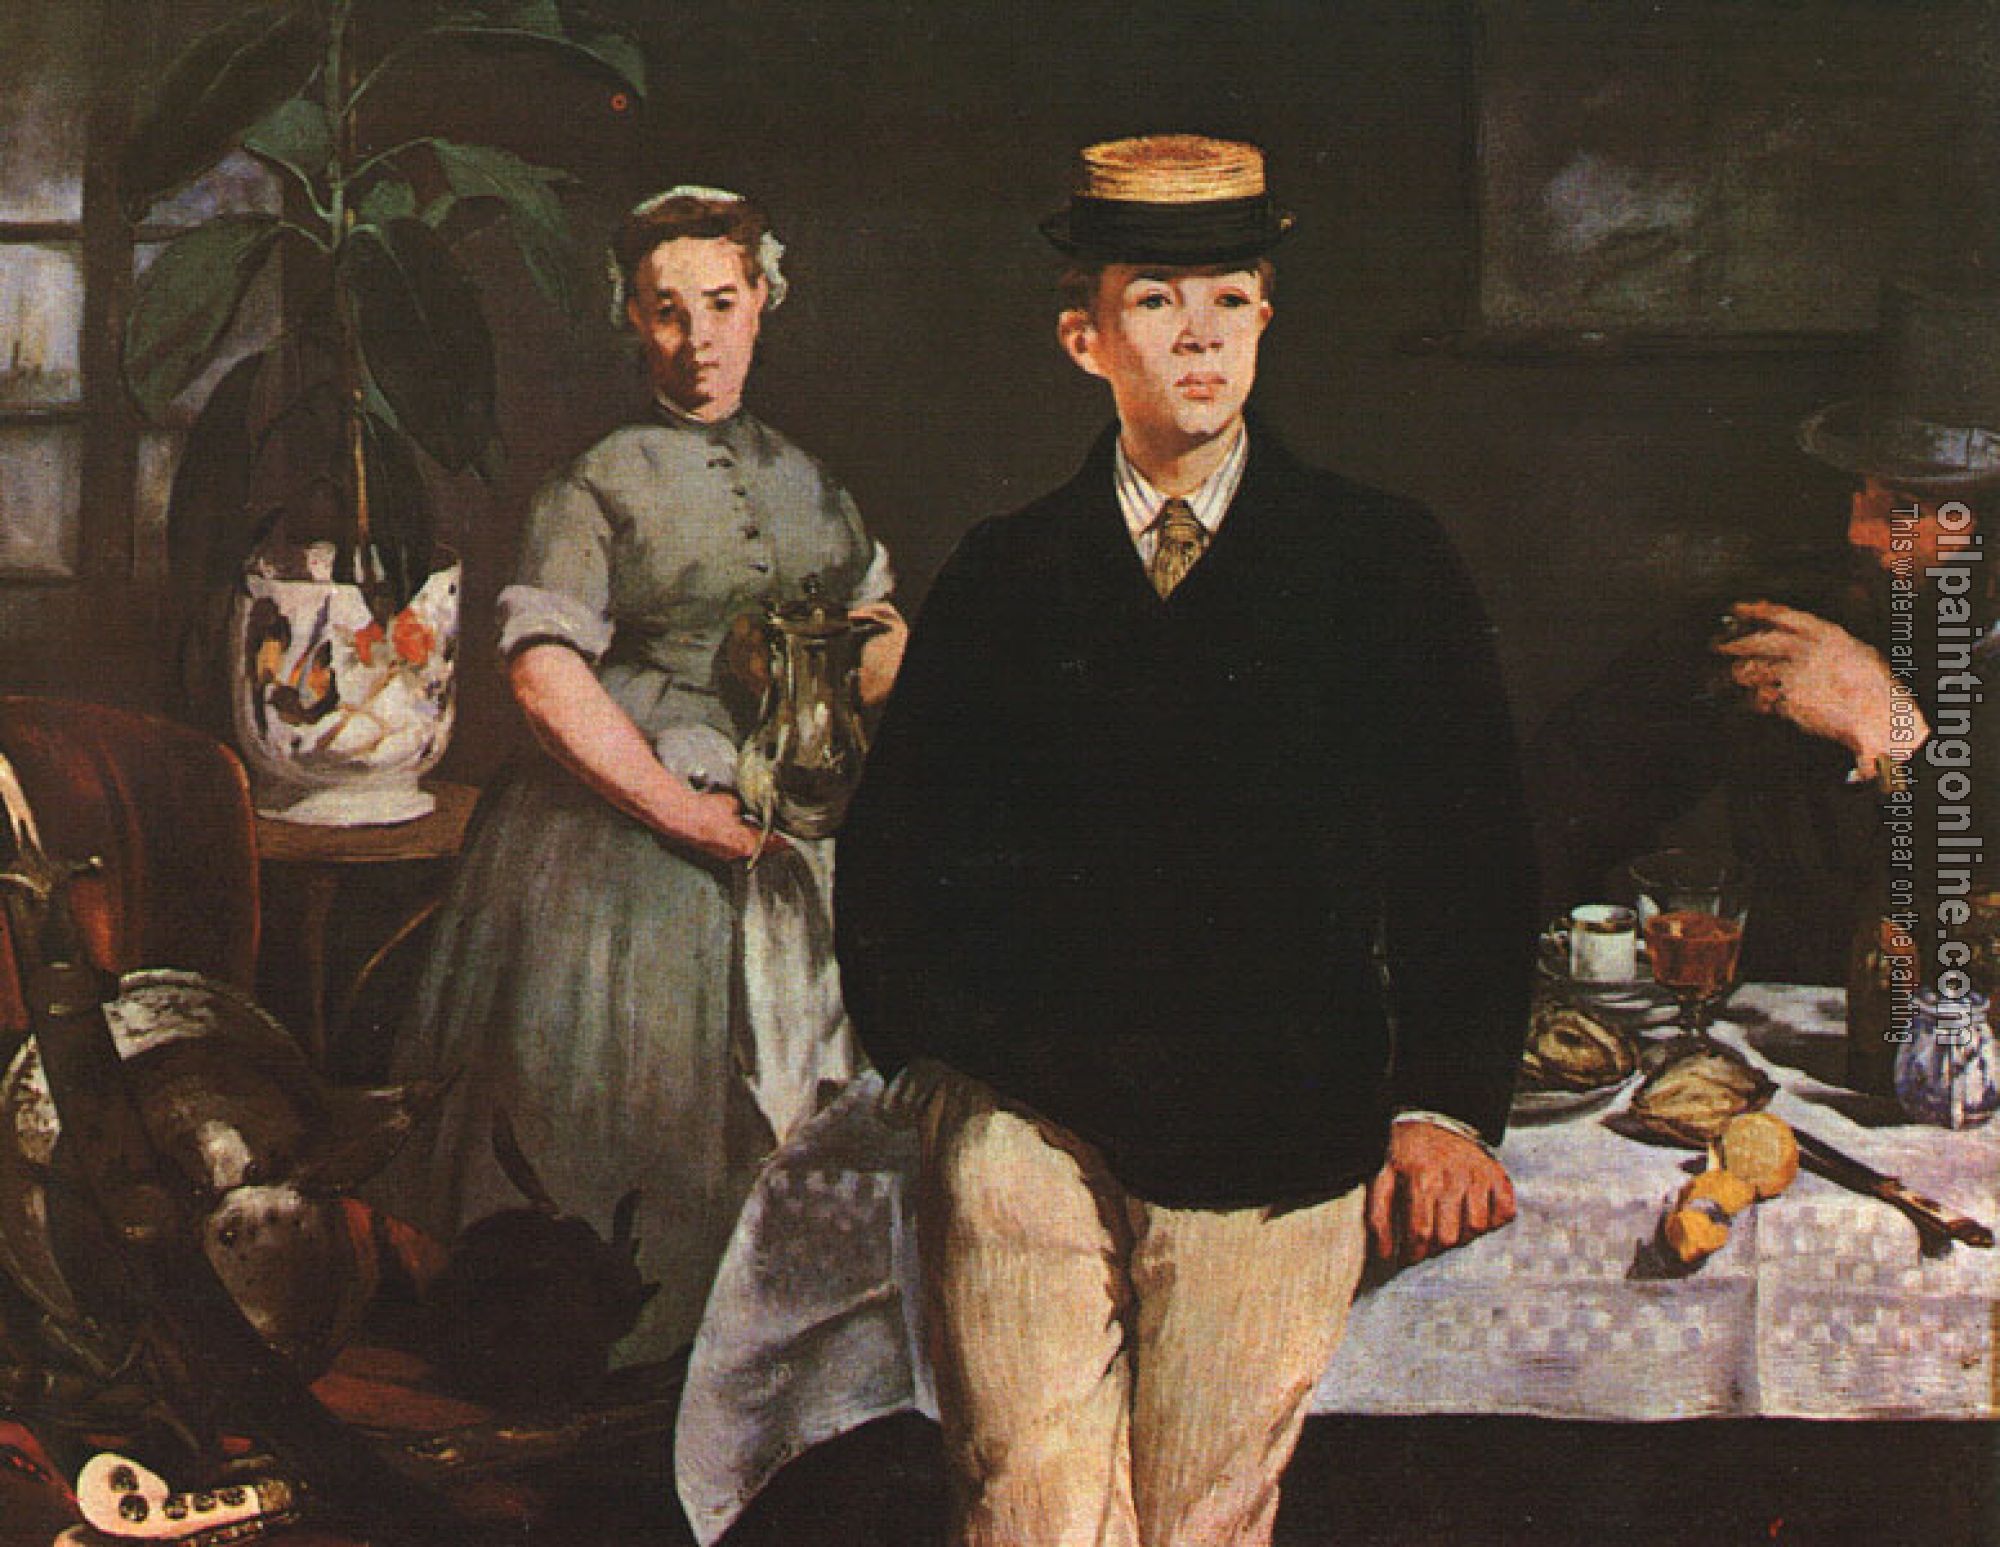 Manet, Edouard - The Luncheon in the Studio